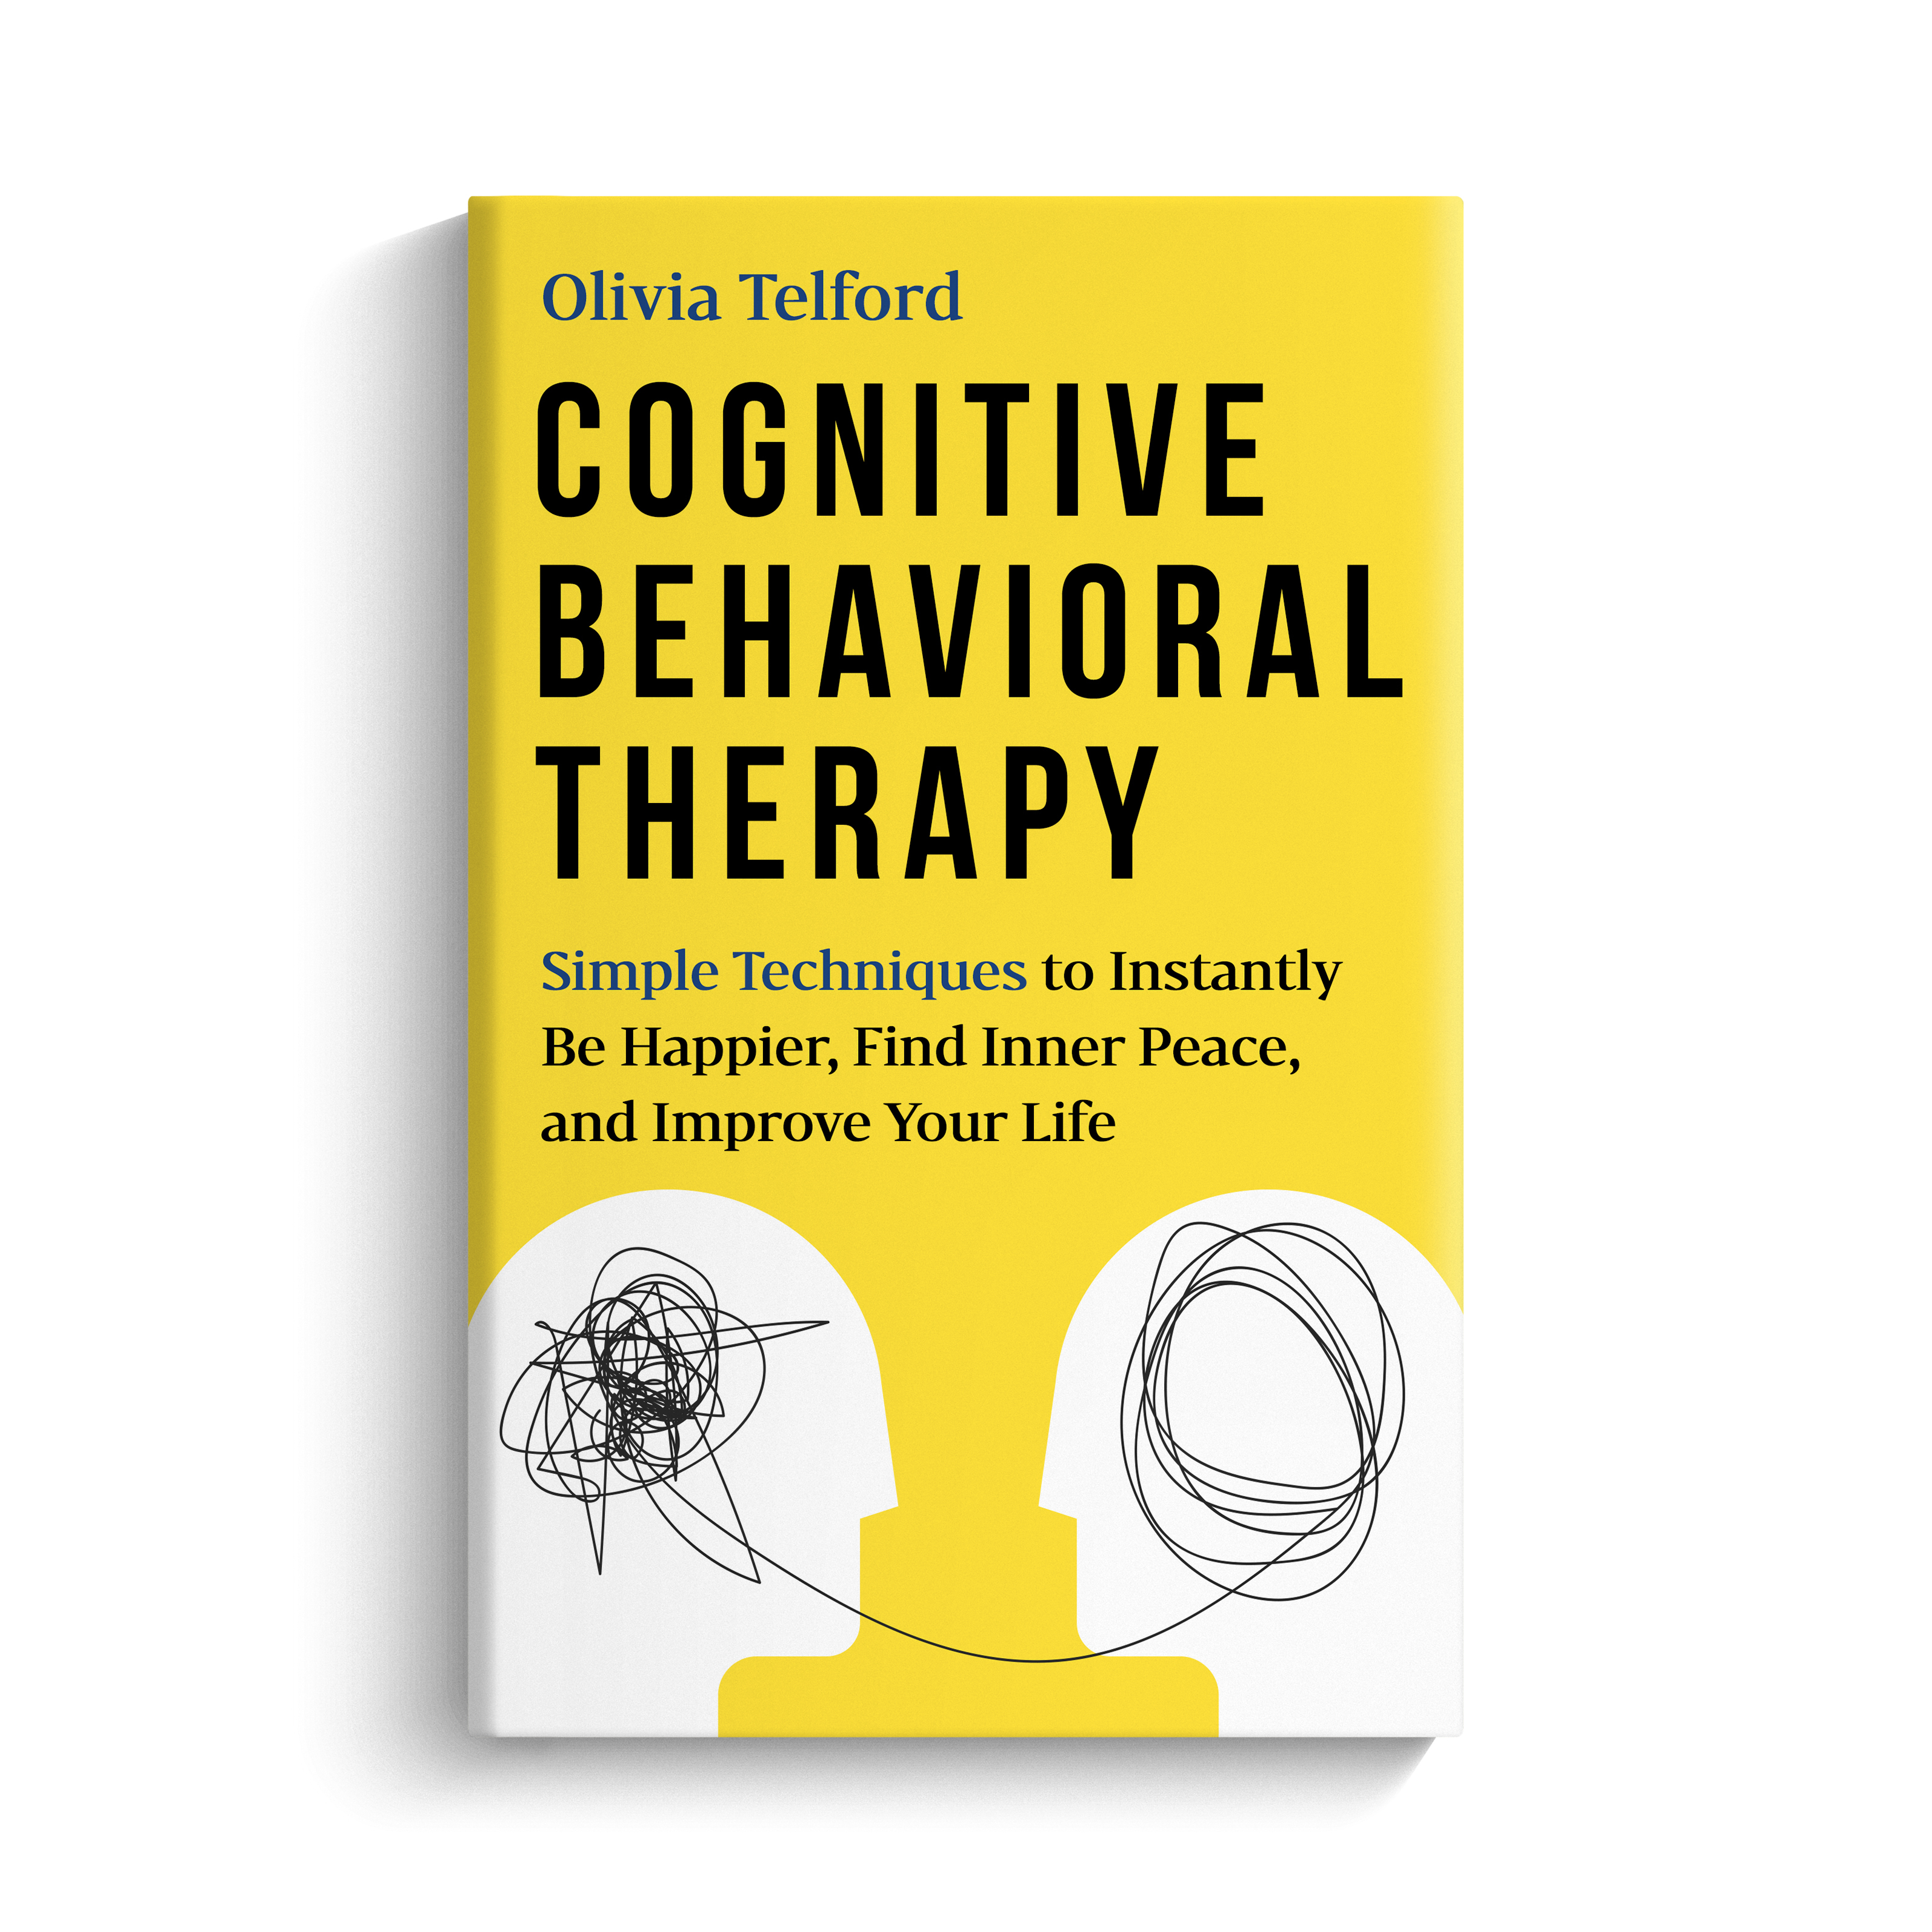 Cognitive Behavioral Therapy by Olivia Telford